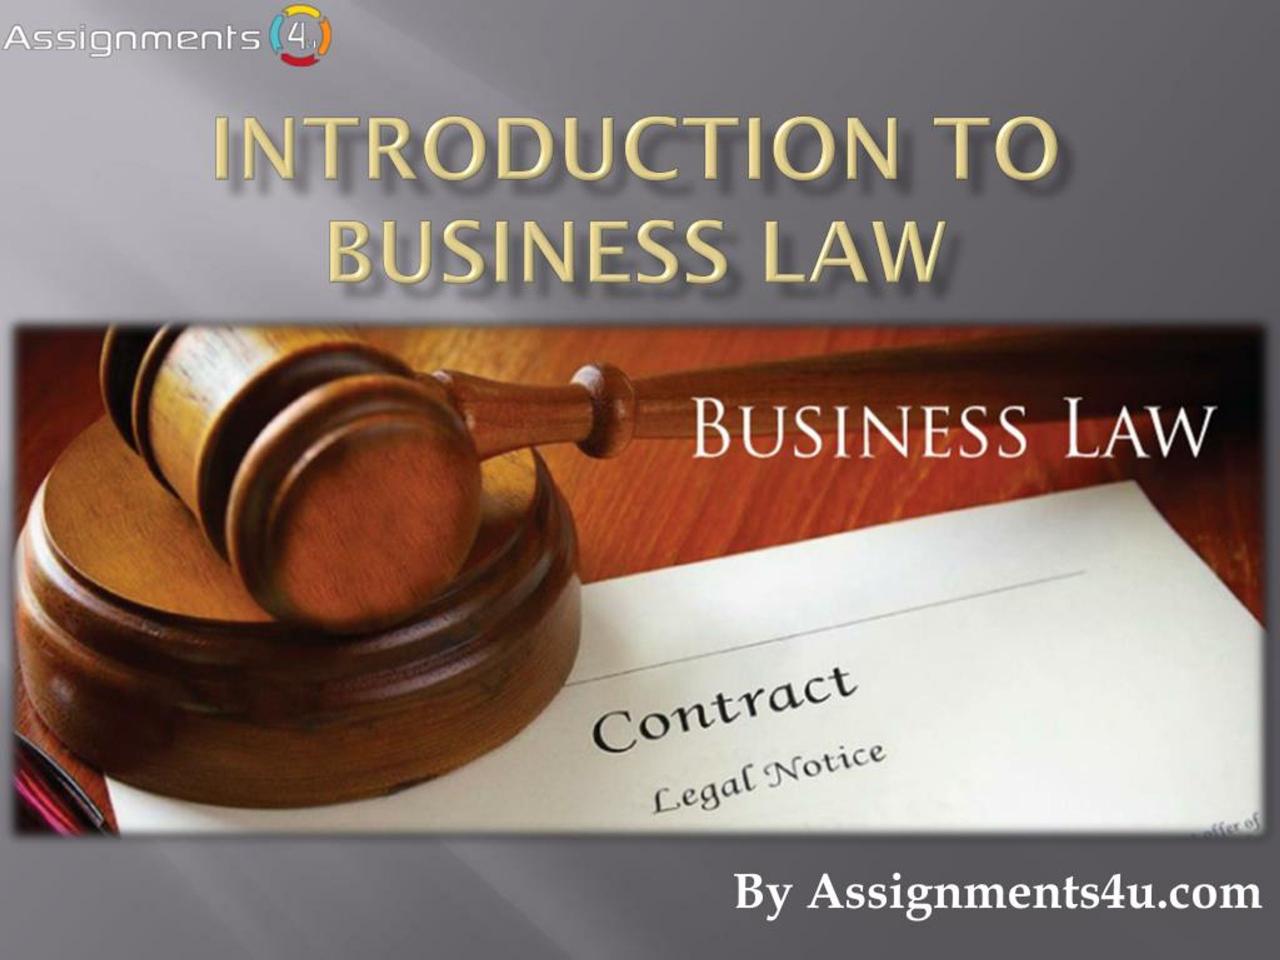 An introduction to business law